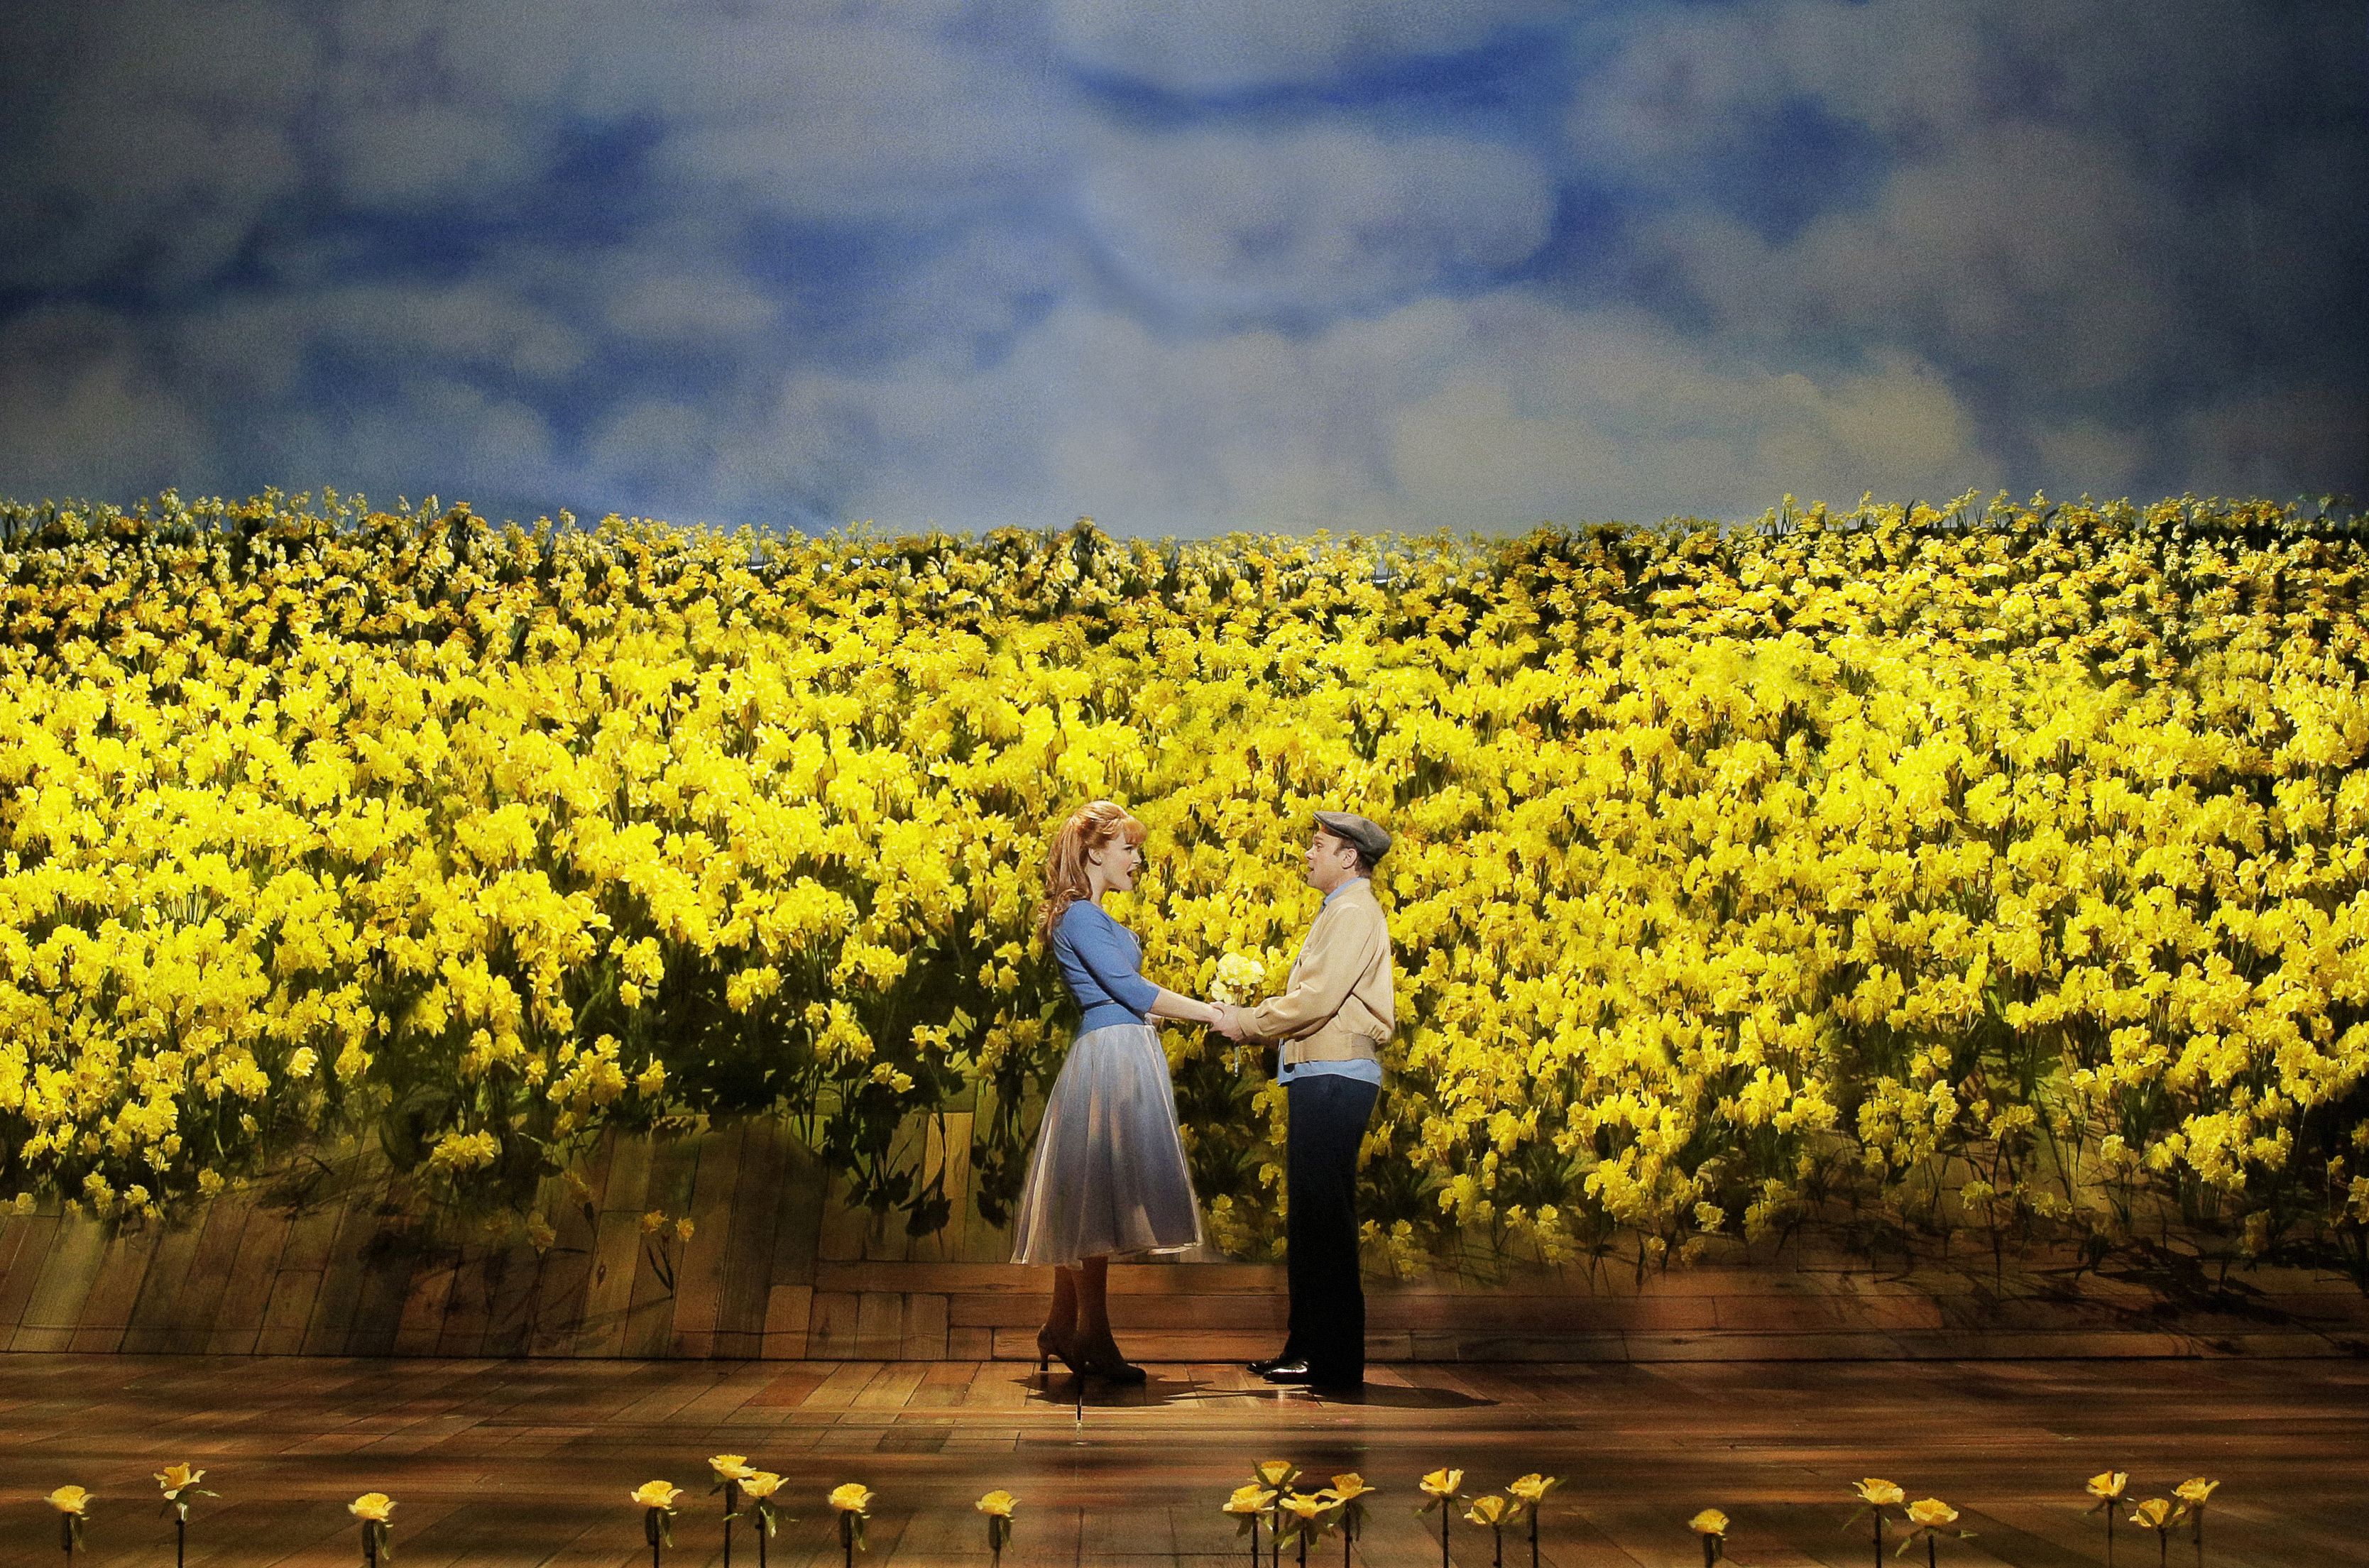 Broadway Musical 'Big Fish' Gets The Hook